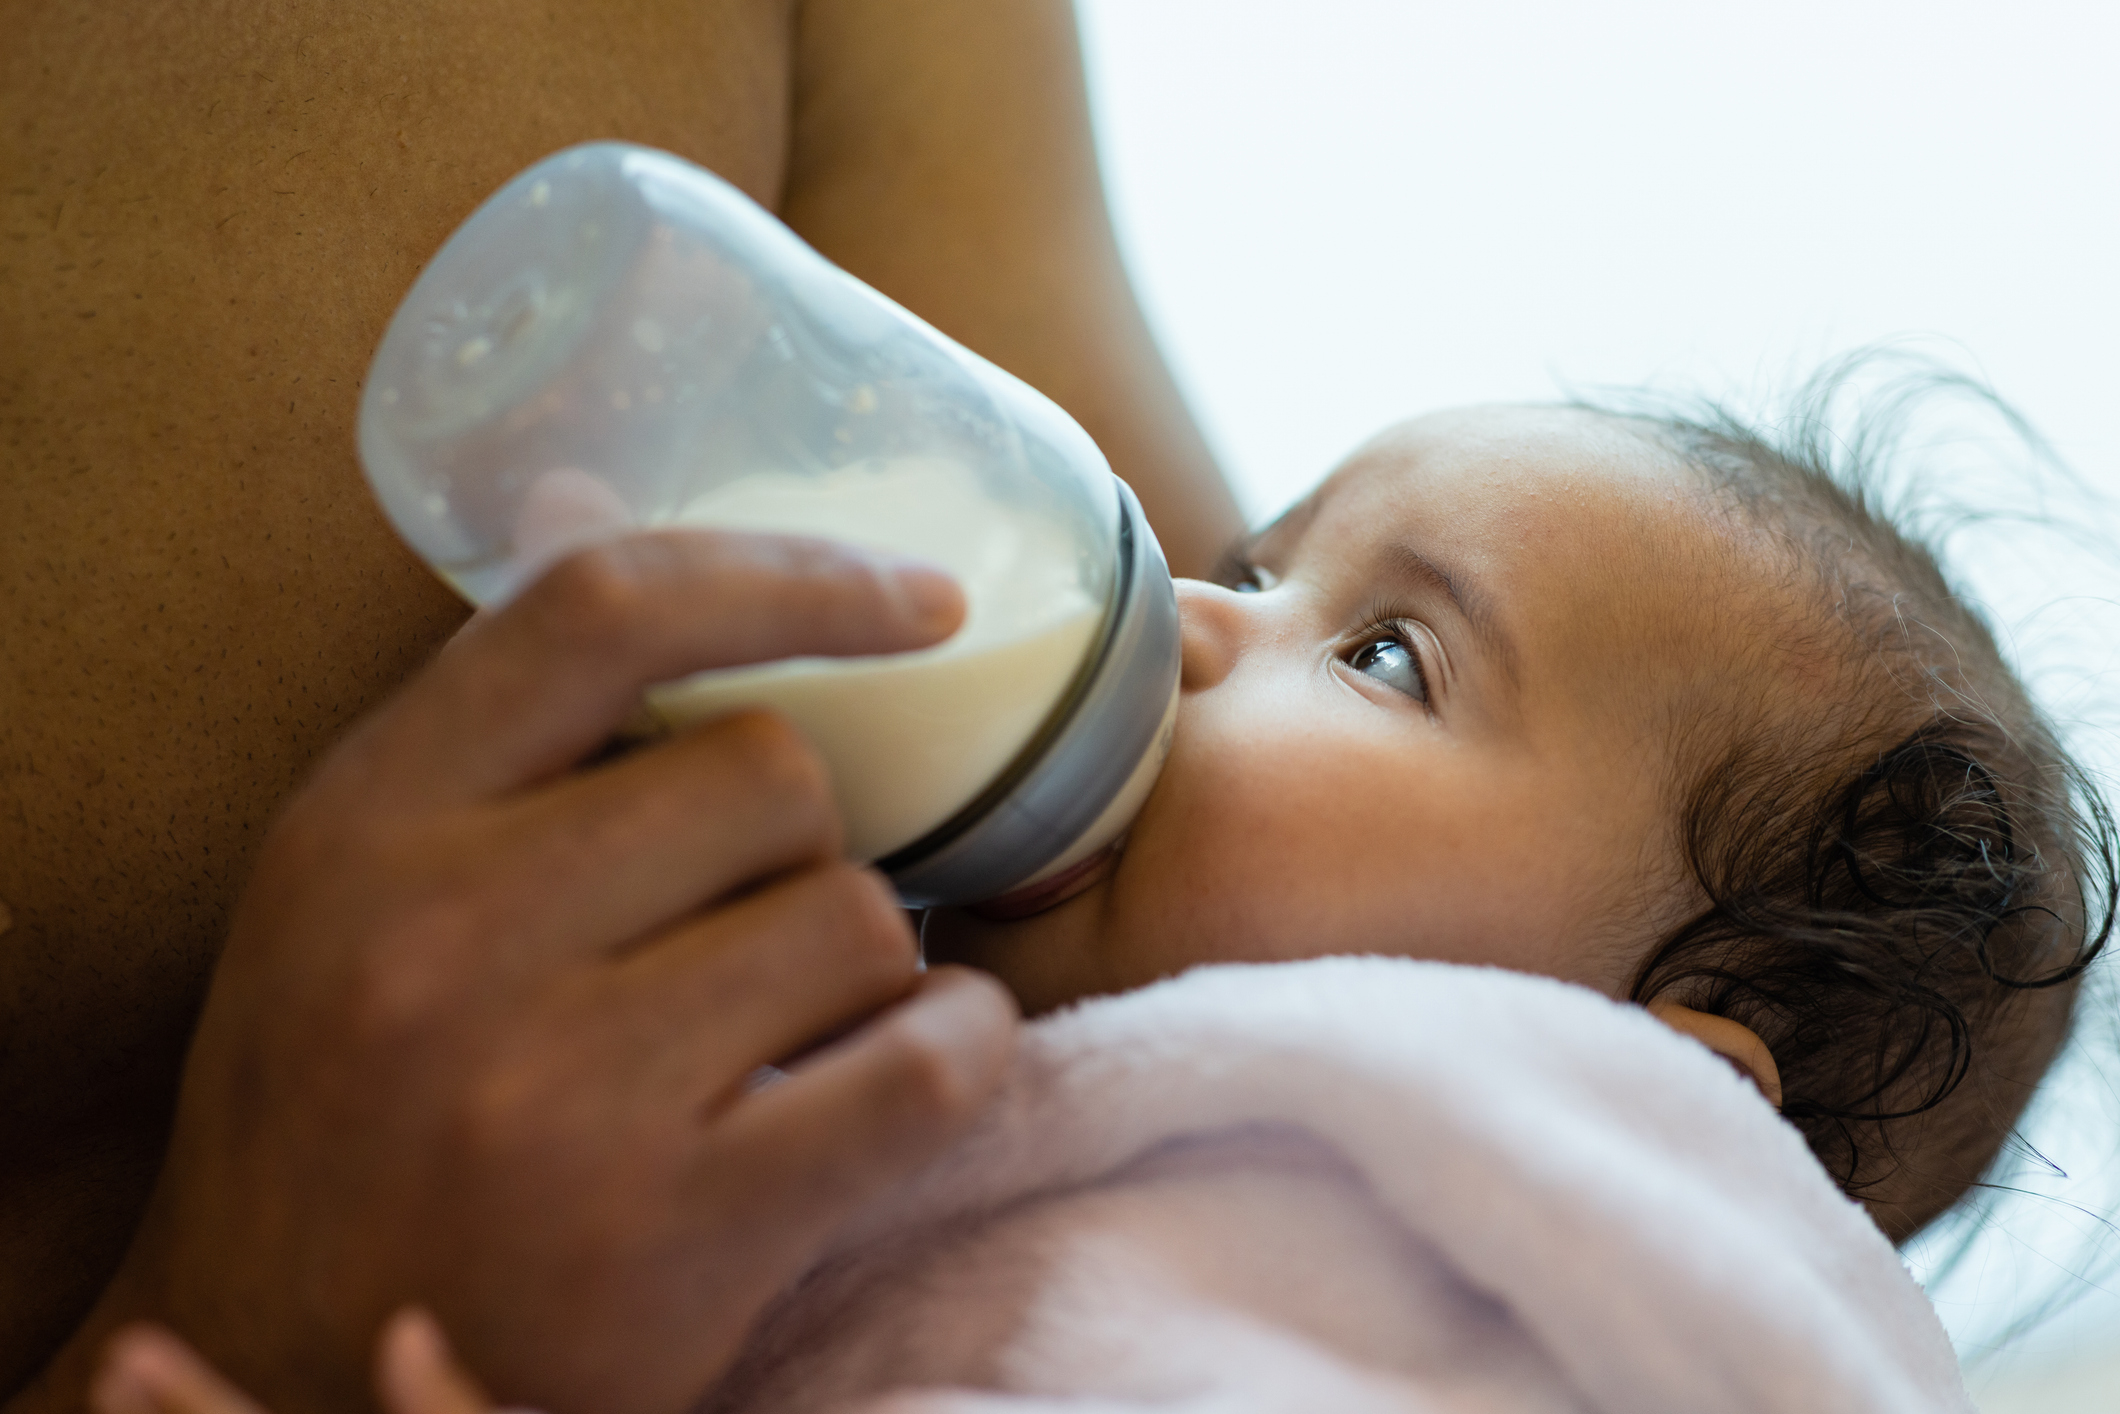 Infant being bottle-fed by a caregiver, close-up view, baby&#x27;s eyes gazing upward